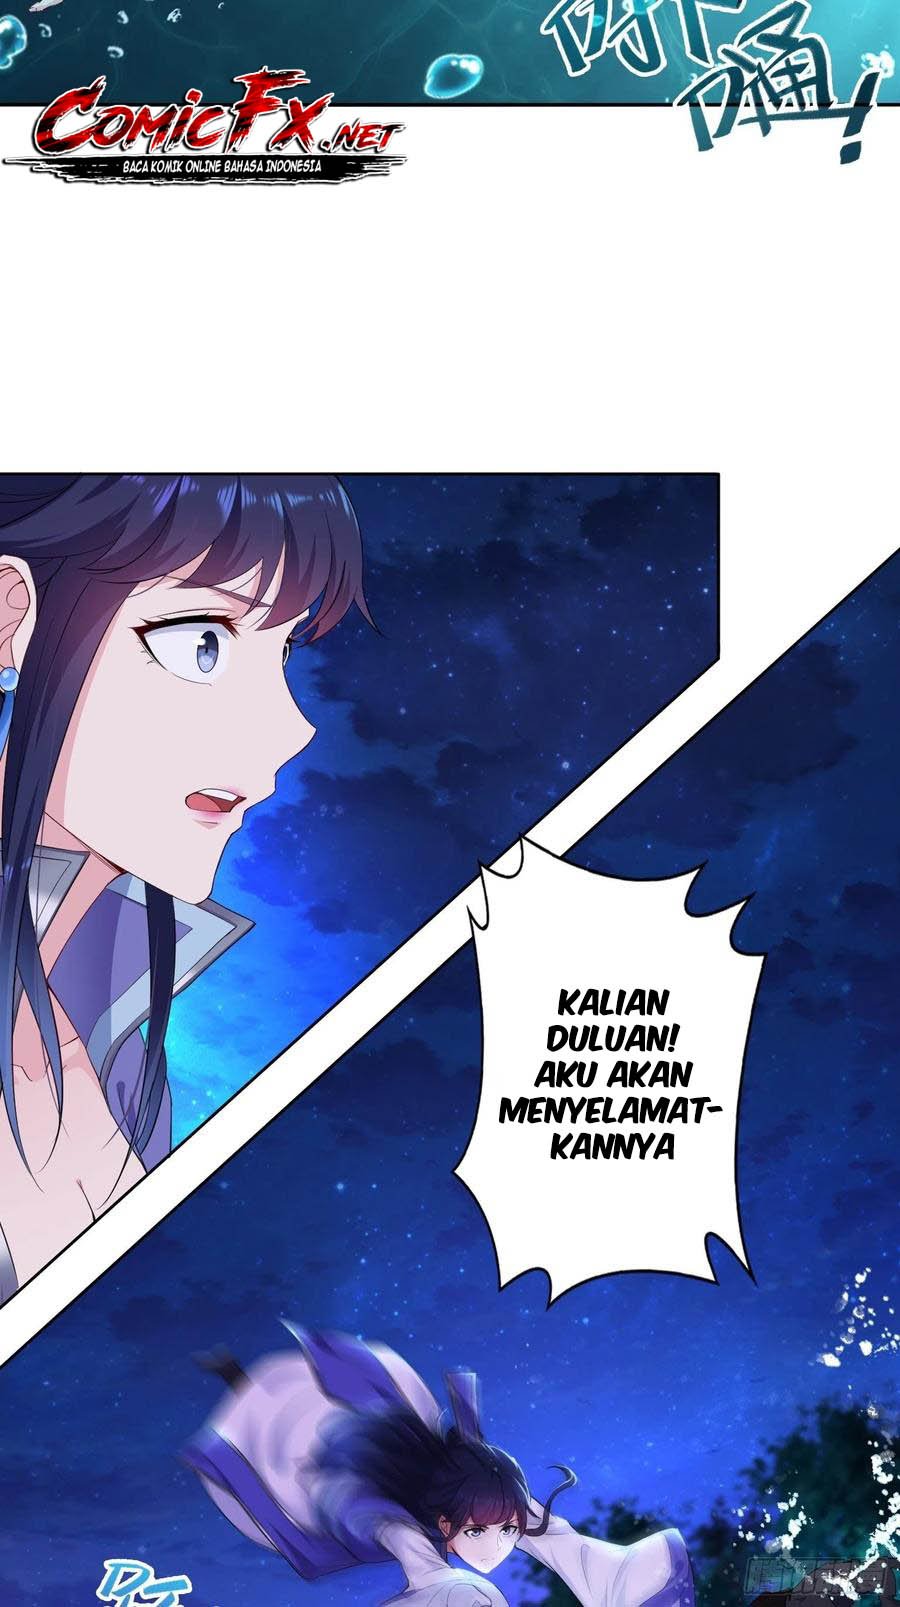 Baca Forced To Become the Villain’s Son-in-law Chapter 45  - GudangKomik